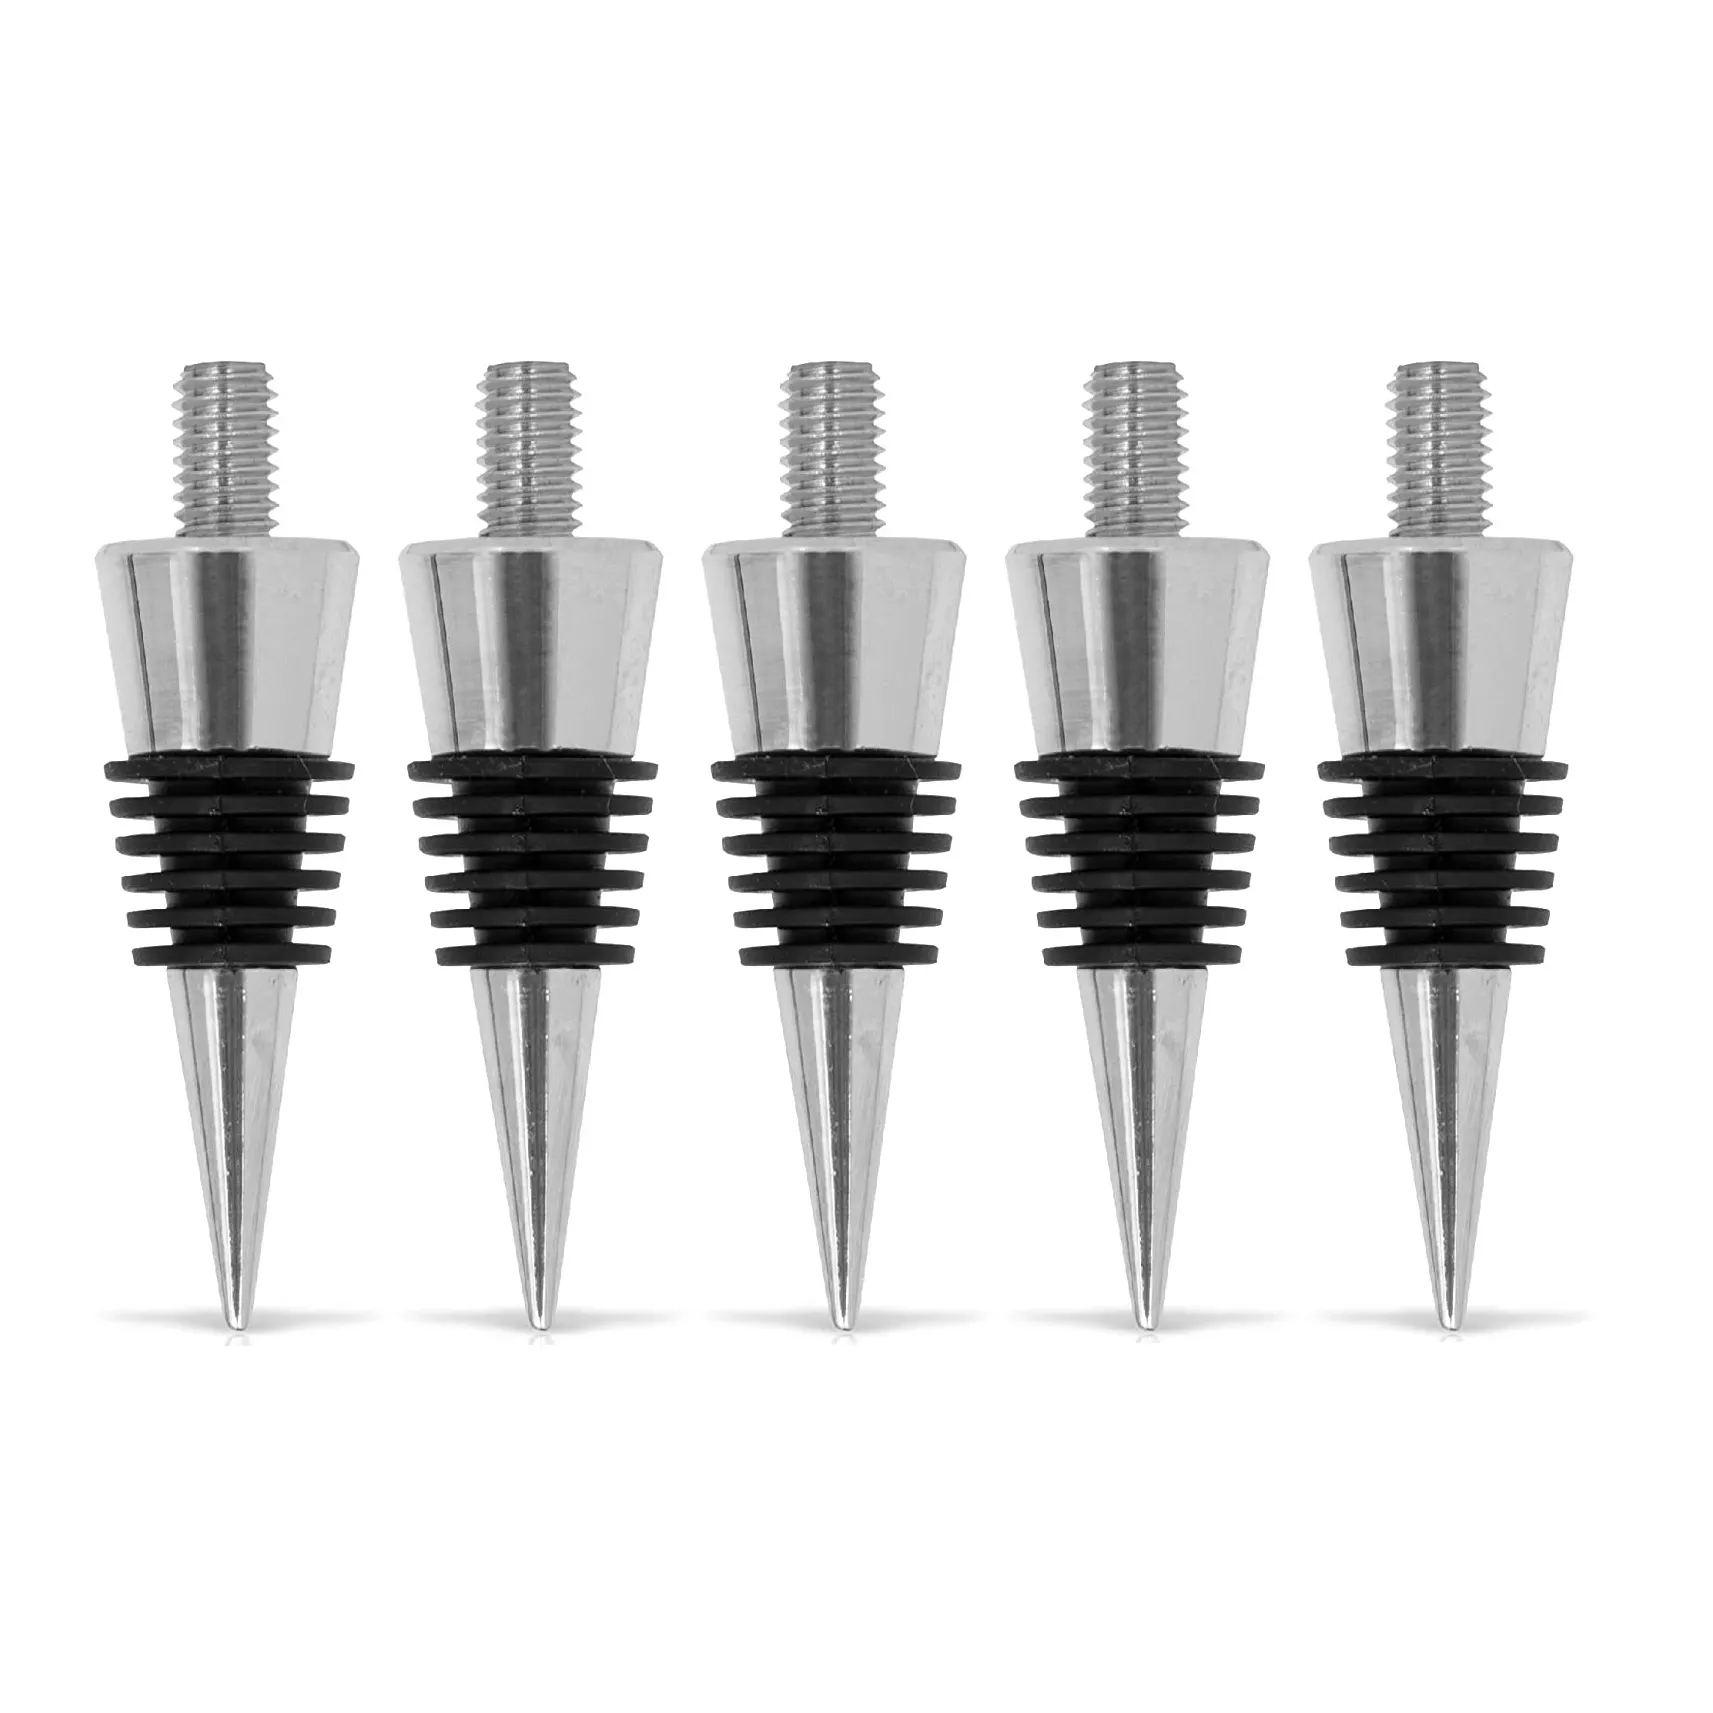 Classic Chrome Cone Shape tpi Threaded Post Bottle Stopper Kits with Black Rubber Stop for Lathe Turned Handles